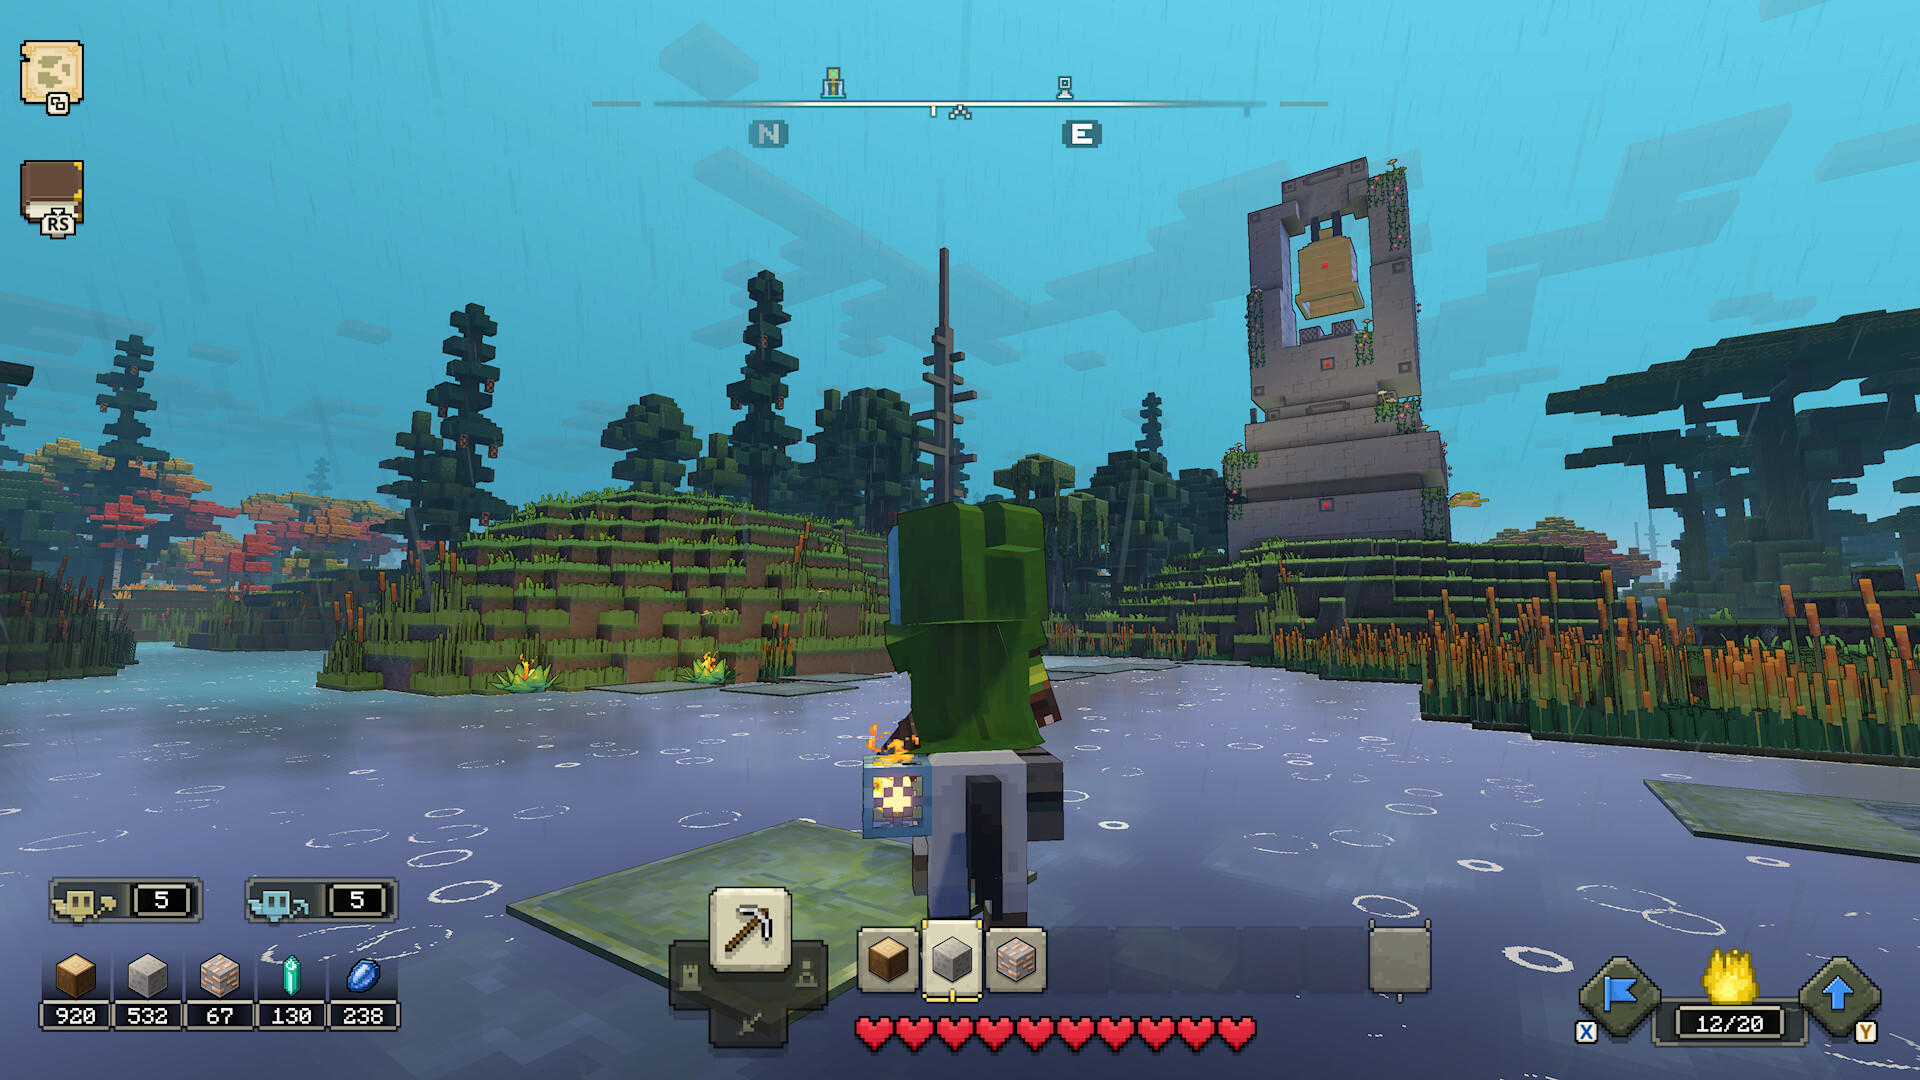 Minecraft Legends Launches in Spring 2023; New Co-Op Gameplay Shown